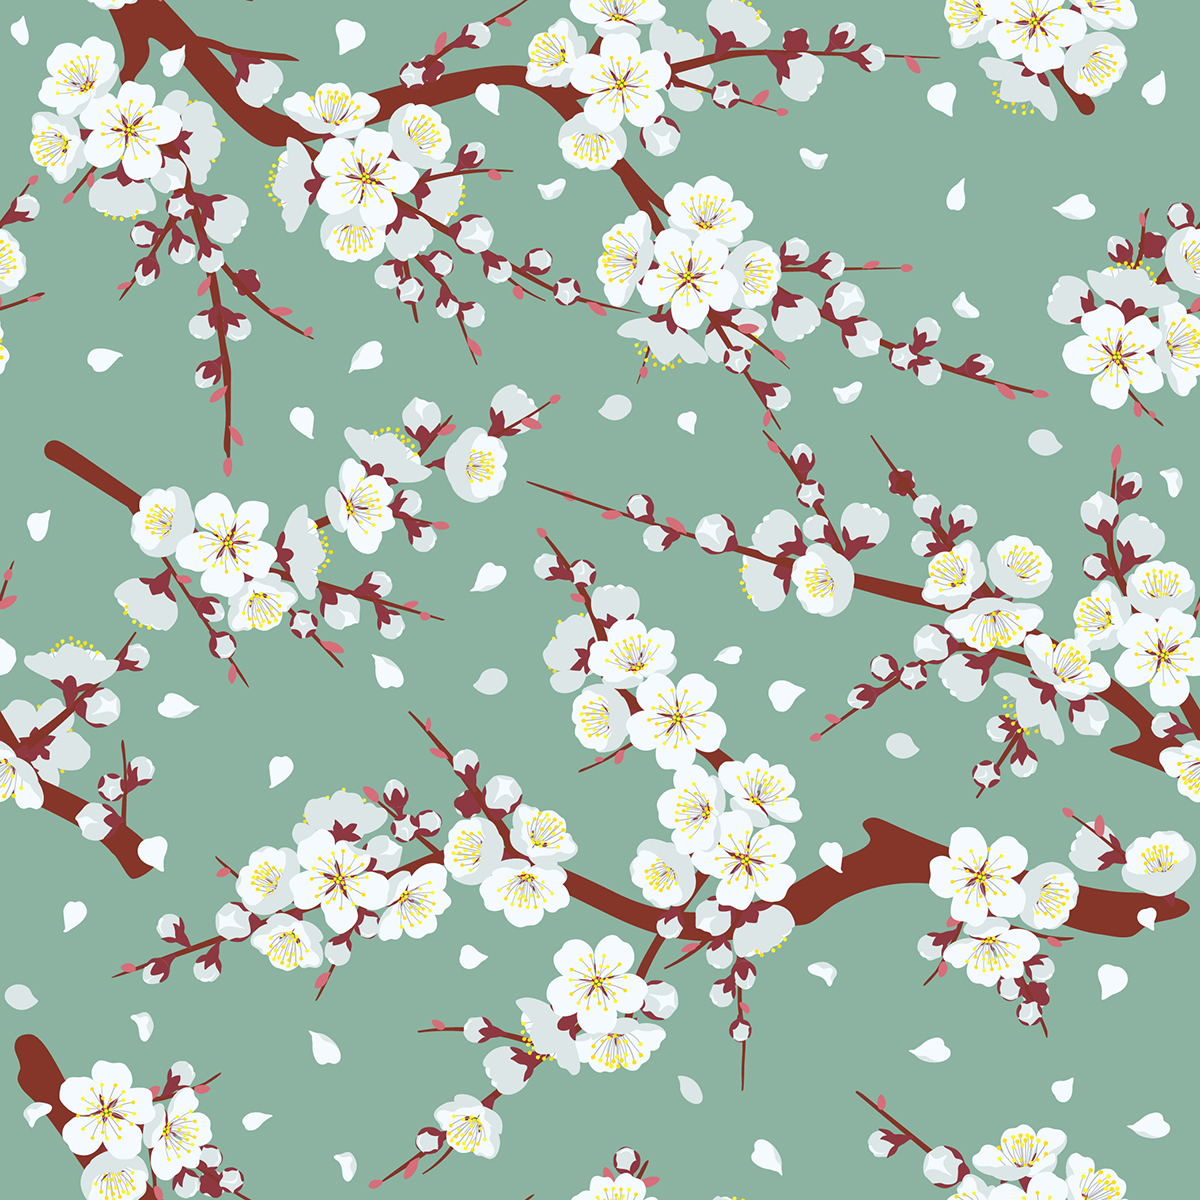 A pattern of white flowers on a tree branch